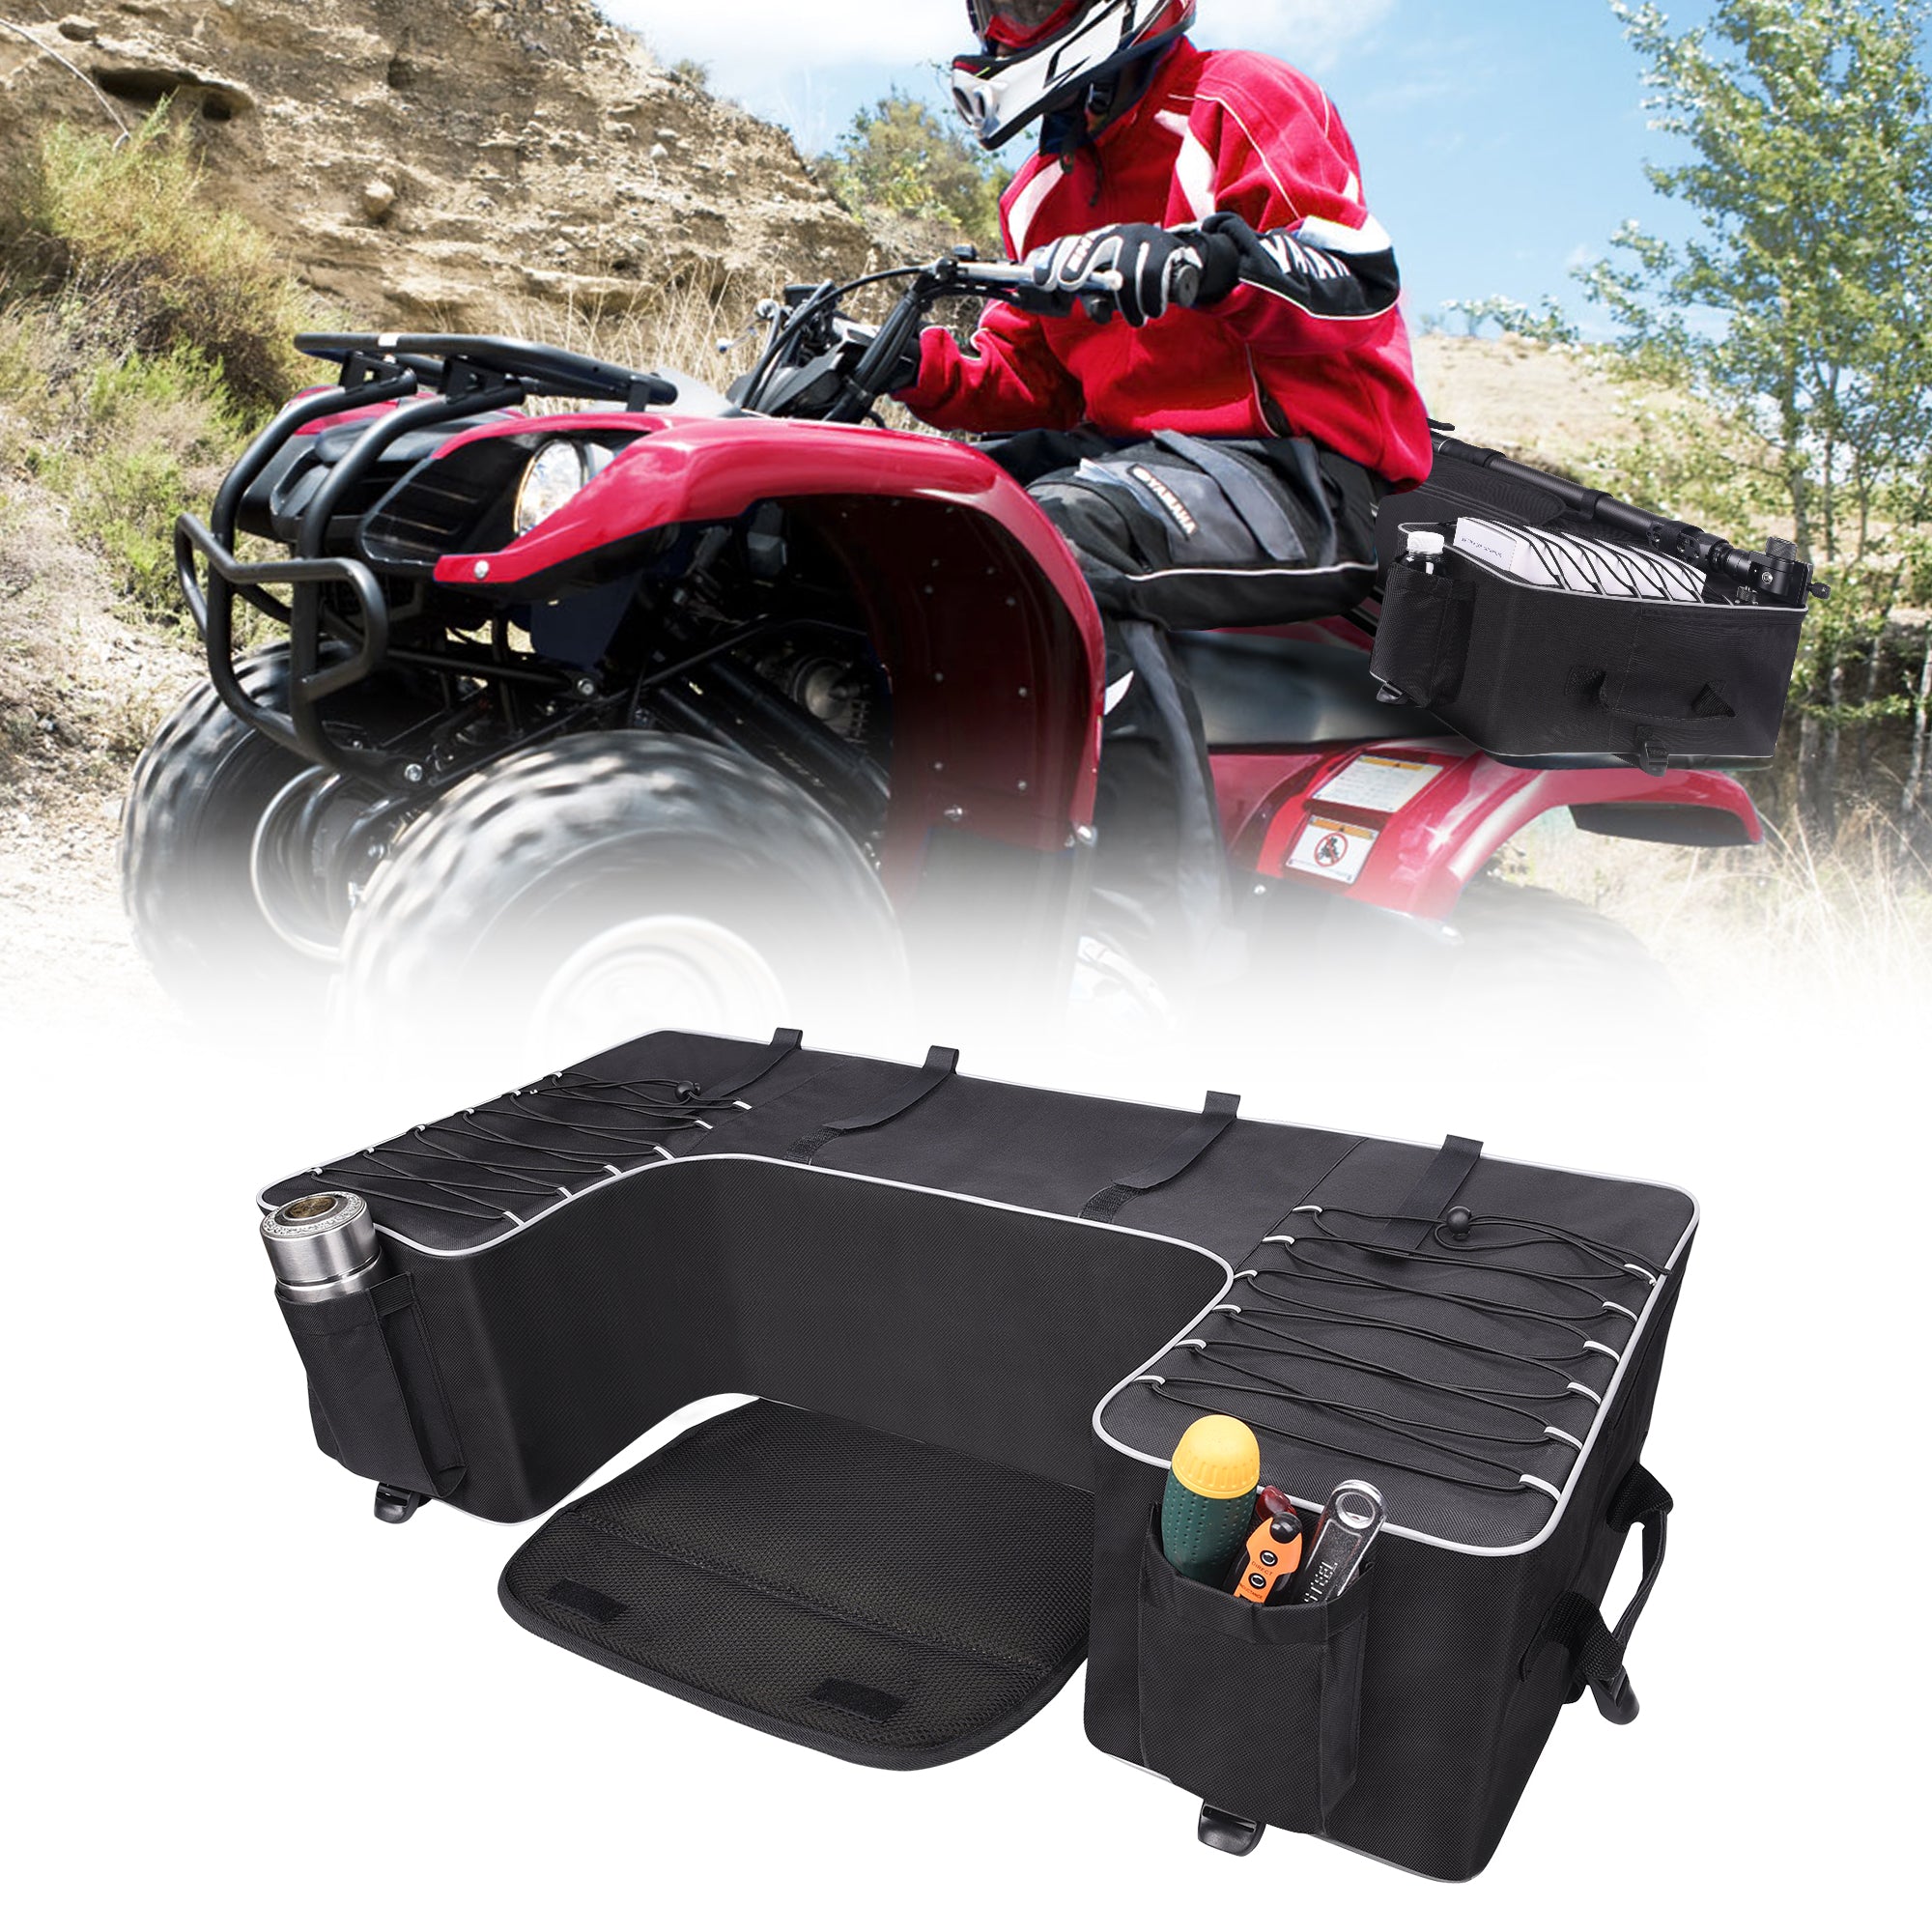 ATV Seat Bag, ATV Storage Cargo Rear Bags With Cushion Waterproof Zipper Compatible with Polaris Sportsman Rancher Rubicon Foreman Grizzly